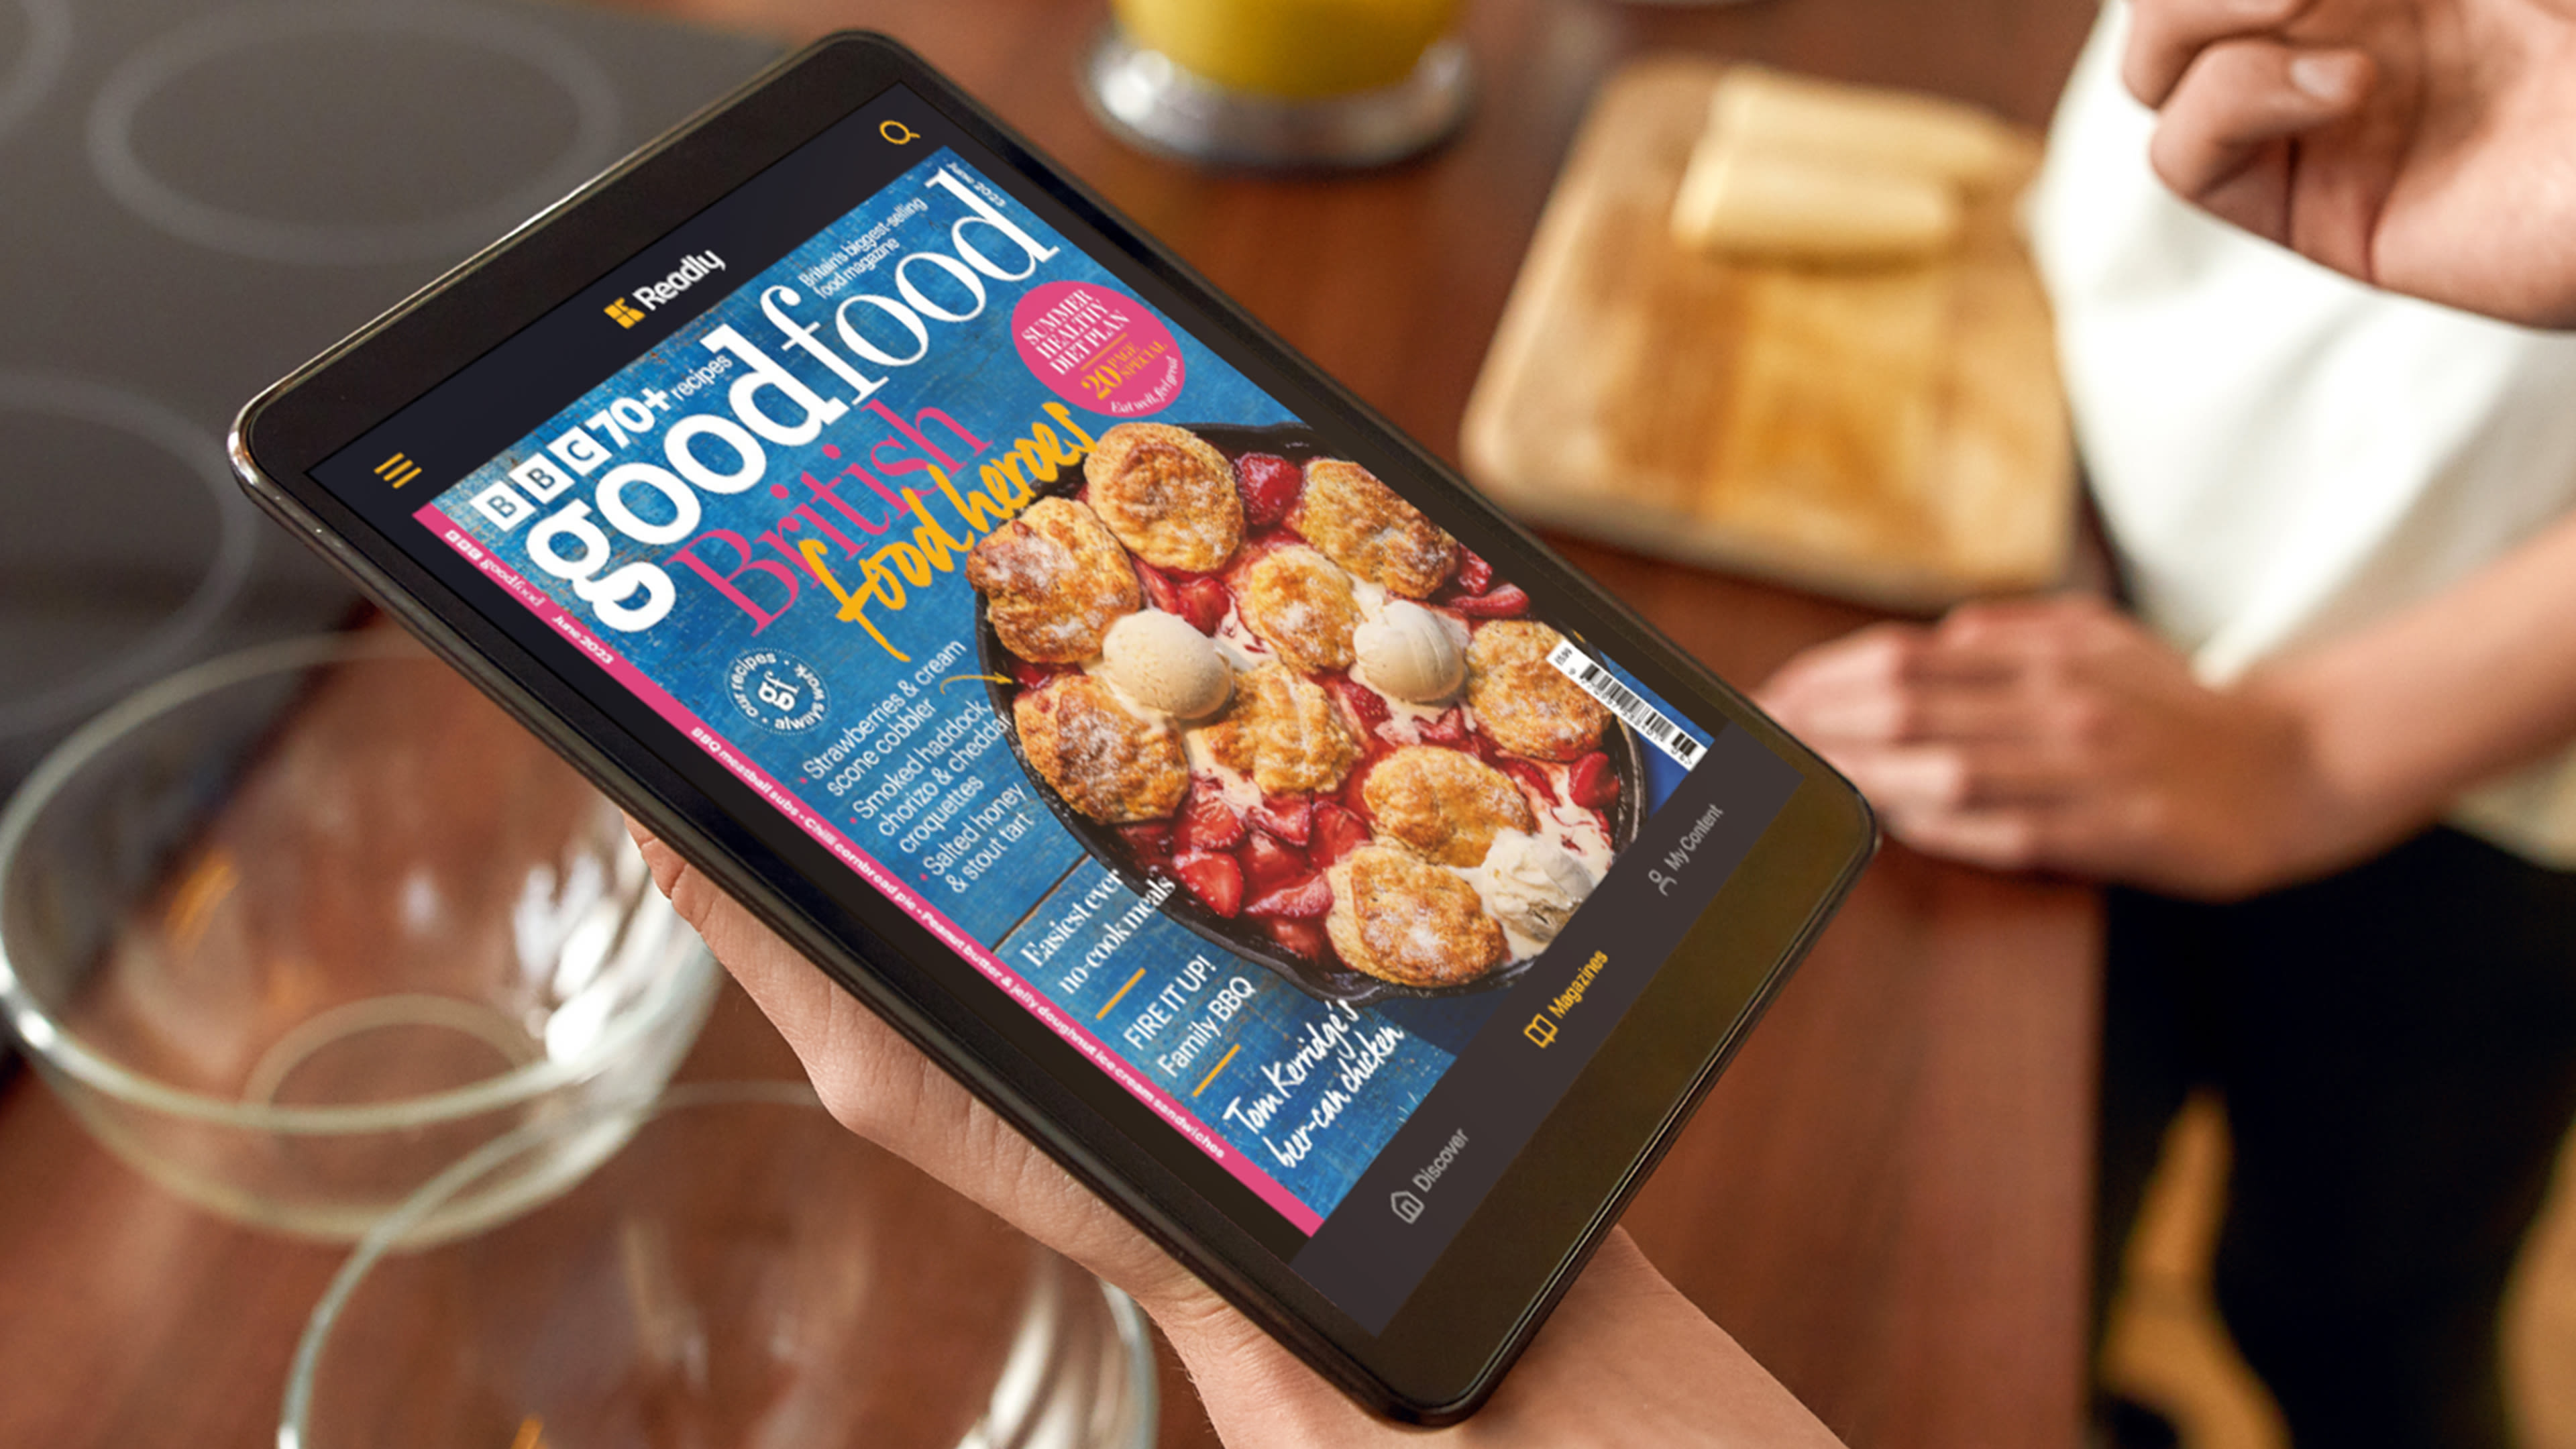 An image of a magazine cover on an iPad